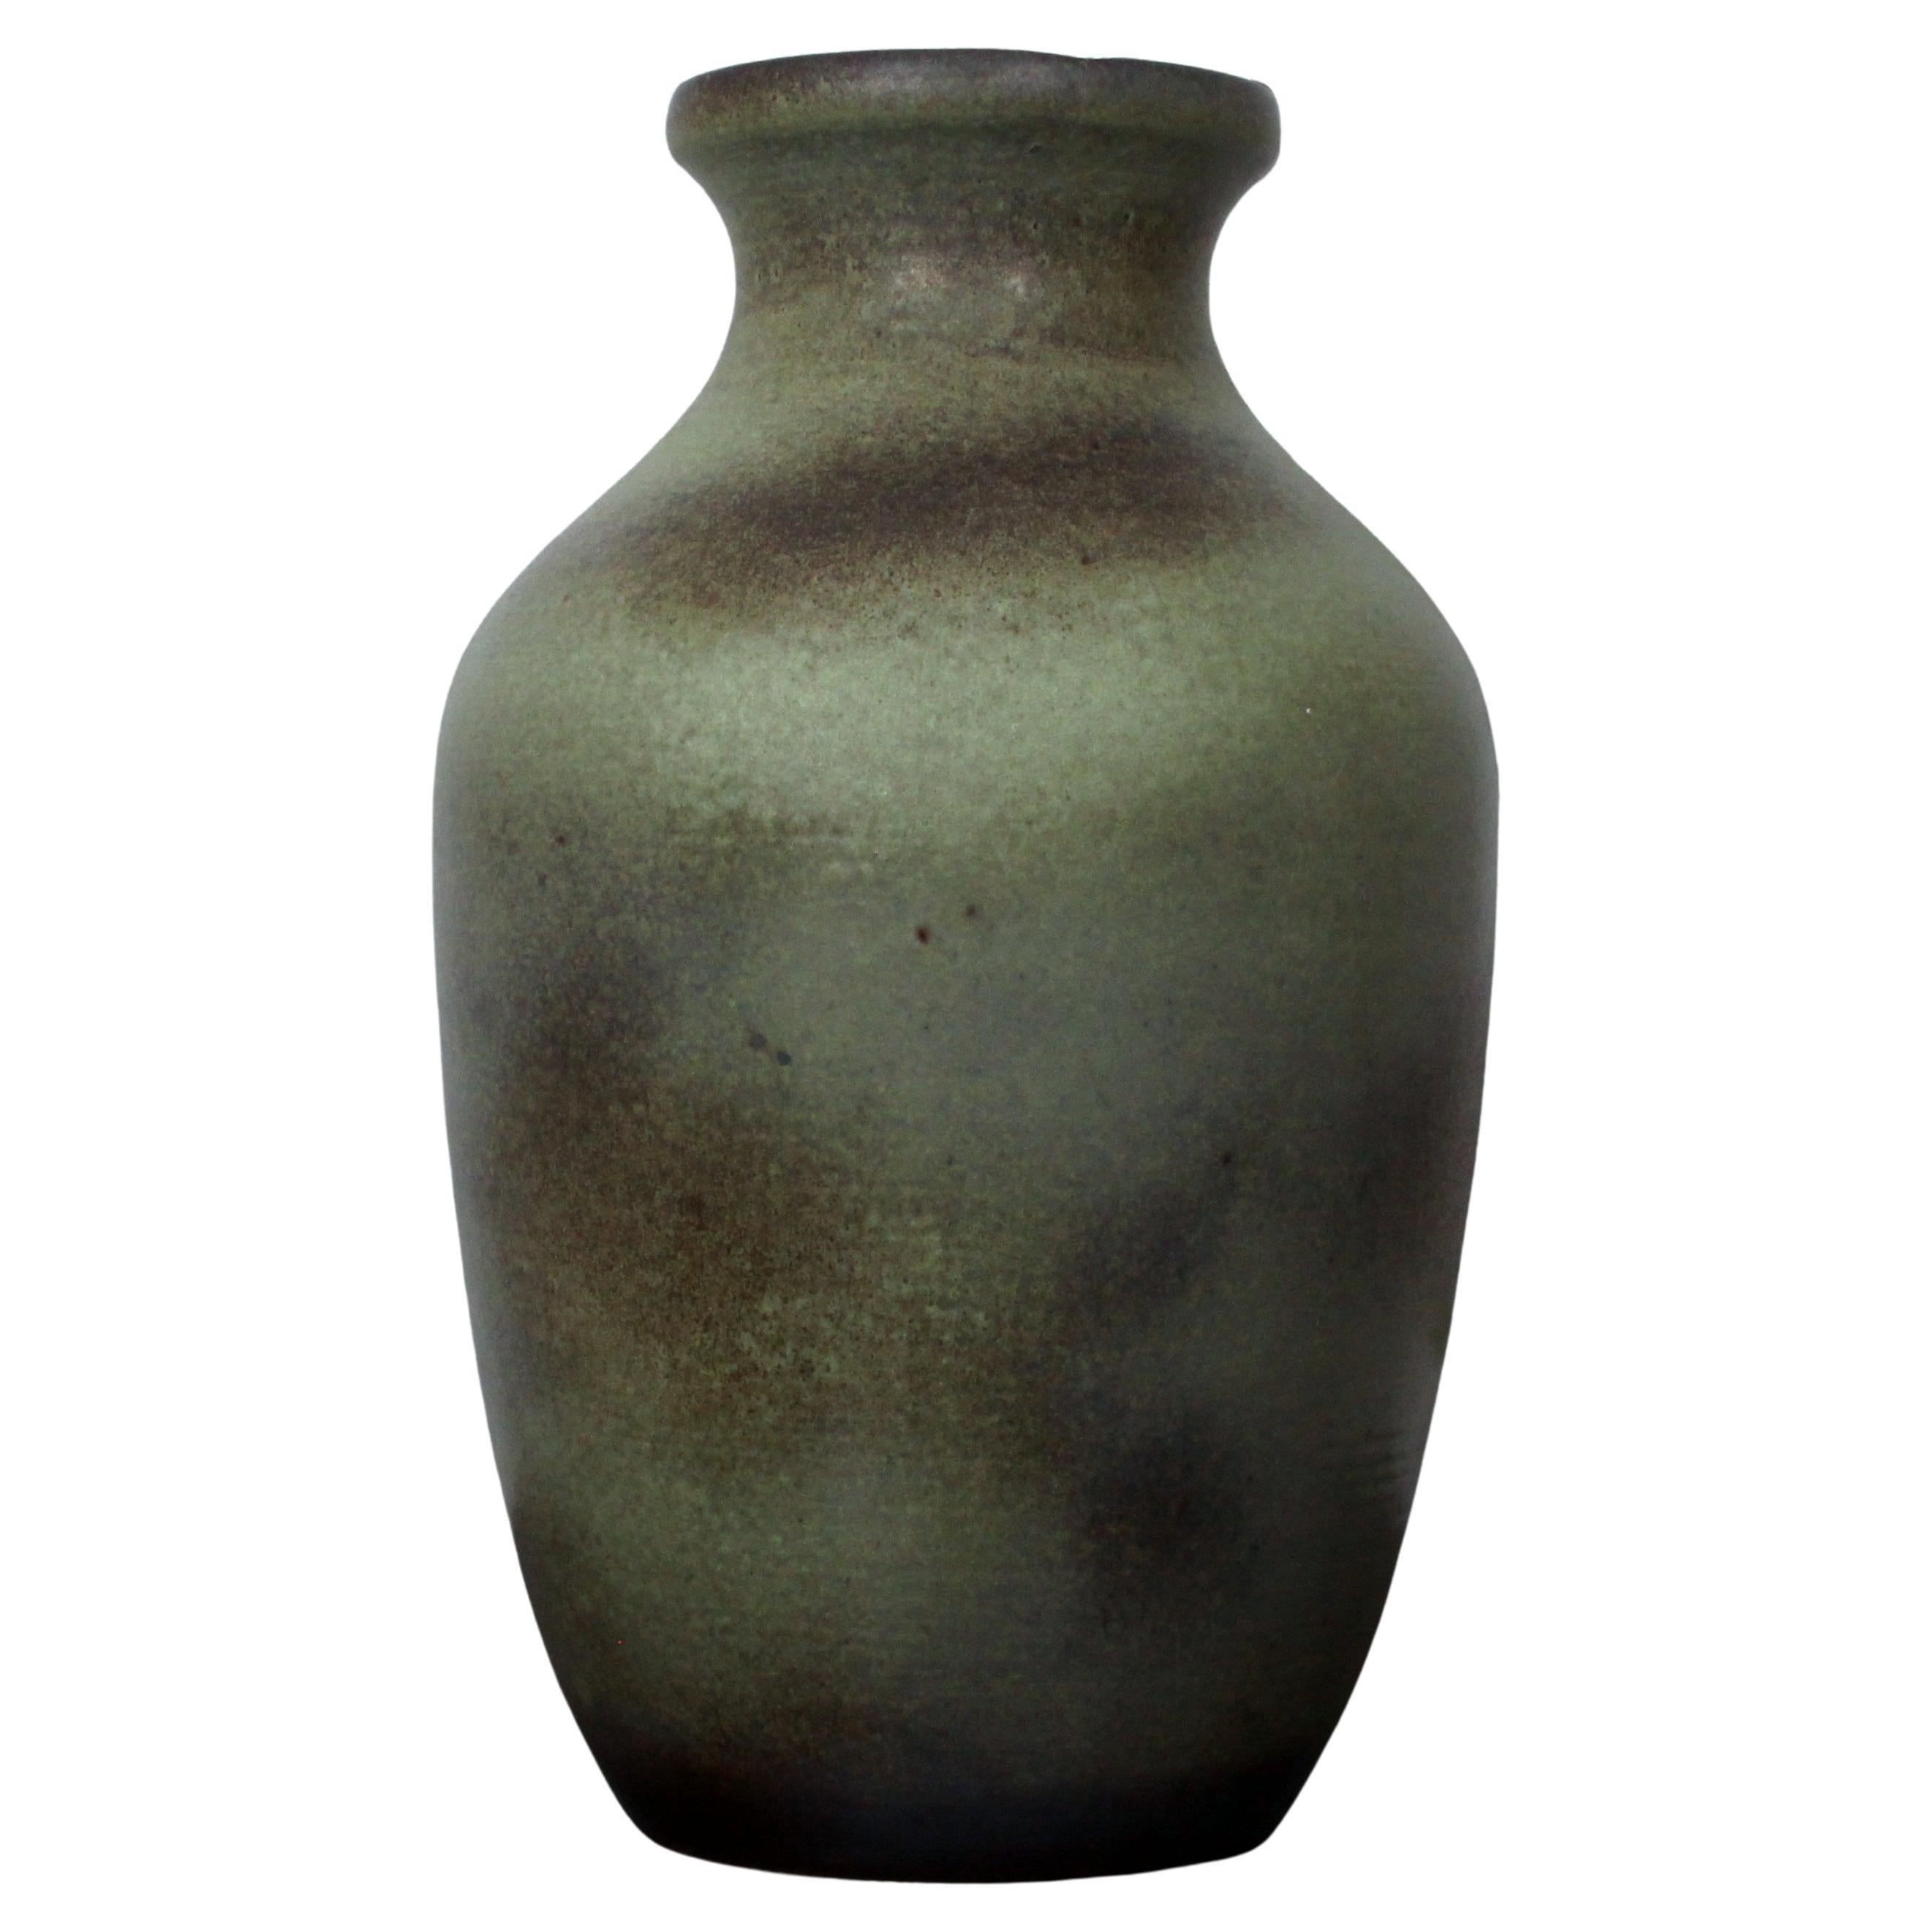 HUGE FLOOR VASE
cloudy green glaze


Manufacturer 	CARSTENS TÖNNIESHOF
Design Period 	1968 to 1978
Production Period 	1968 to 1978
Country of Manufacture 	Germany
 H / height: 52cm ~  Gew. / weight: 5350grs (!)
DM  / diameter max: 30cm ~ DM oben /